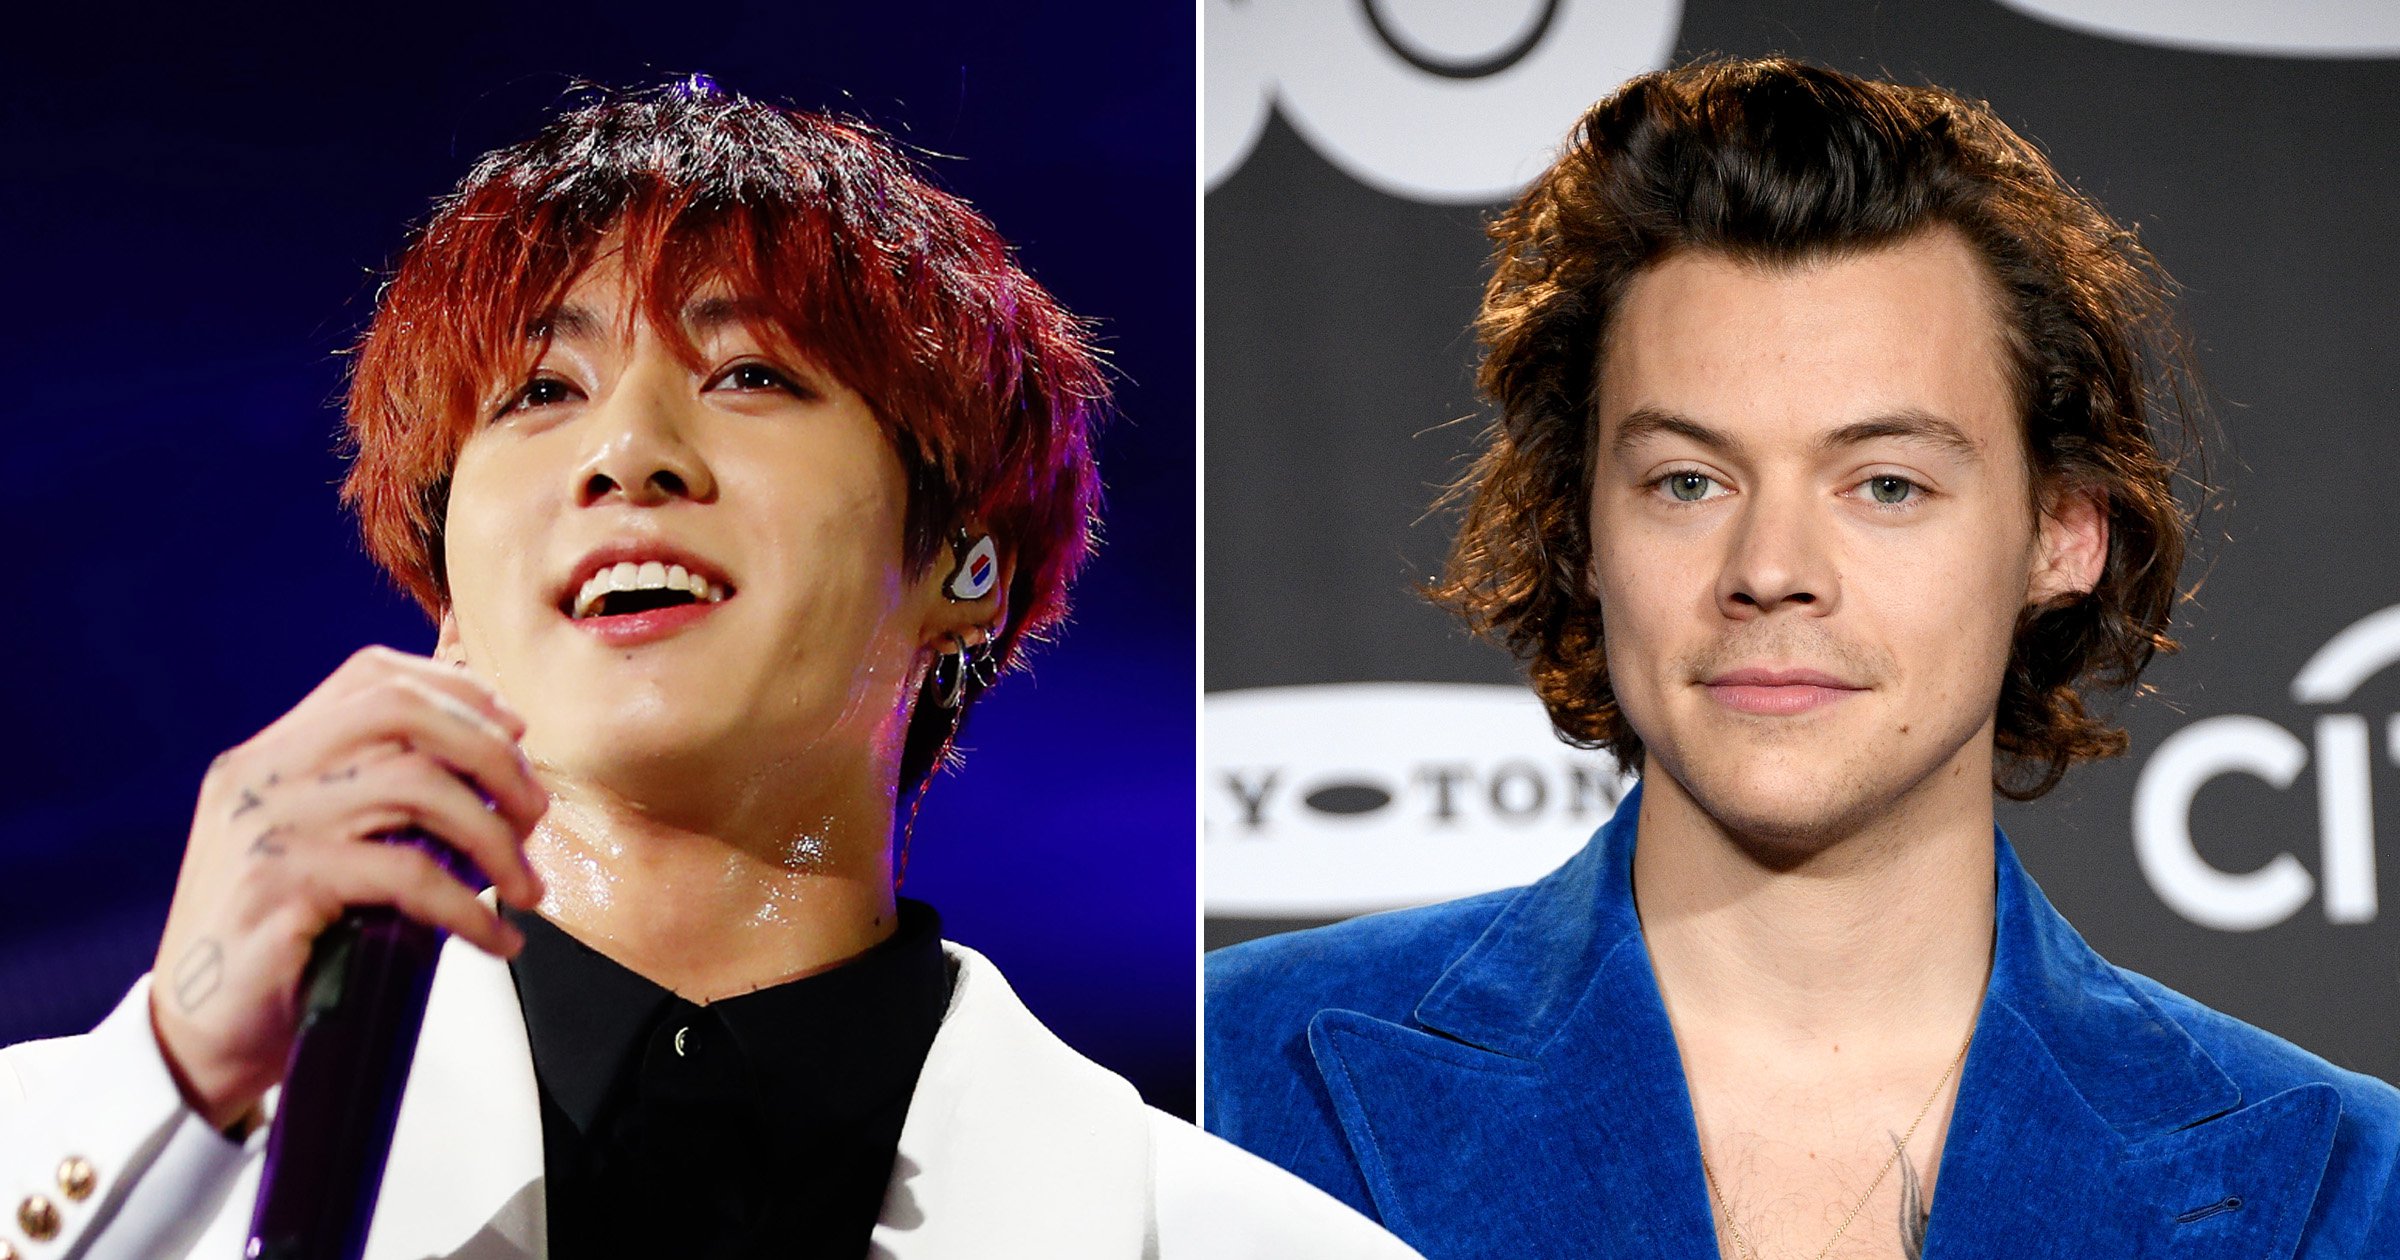 Bts Star Jungkook Covers Harry Styles Song And Fans Are Falling Over The Stunning Rendition